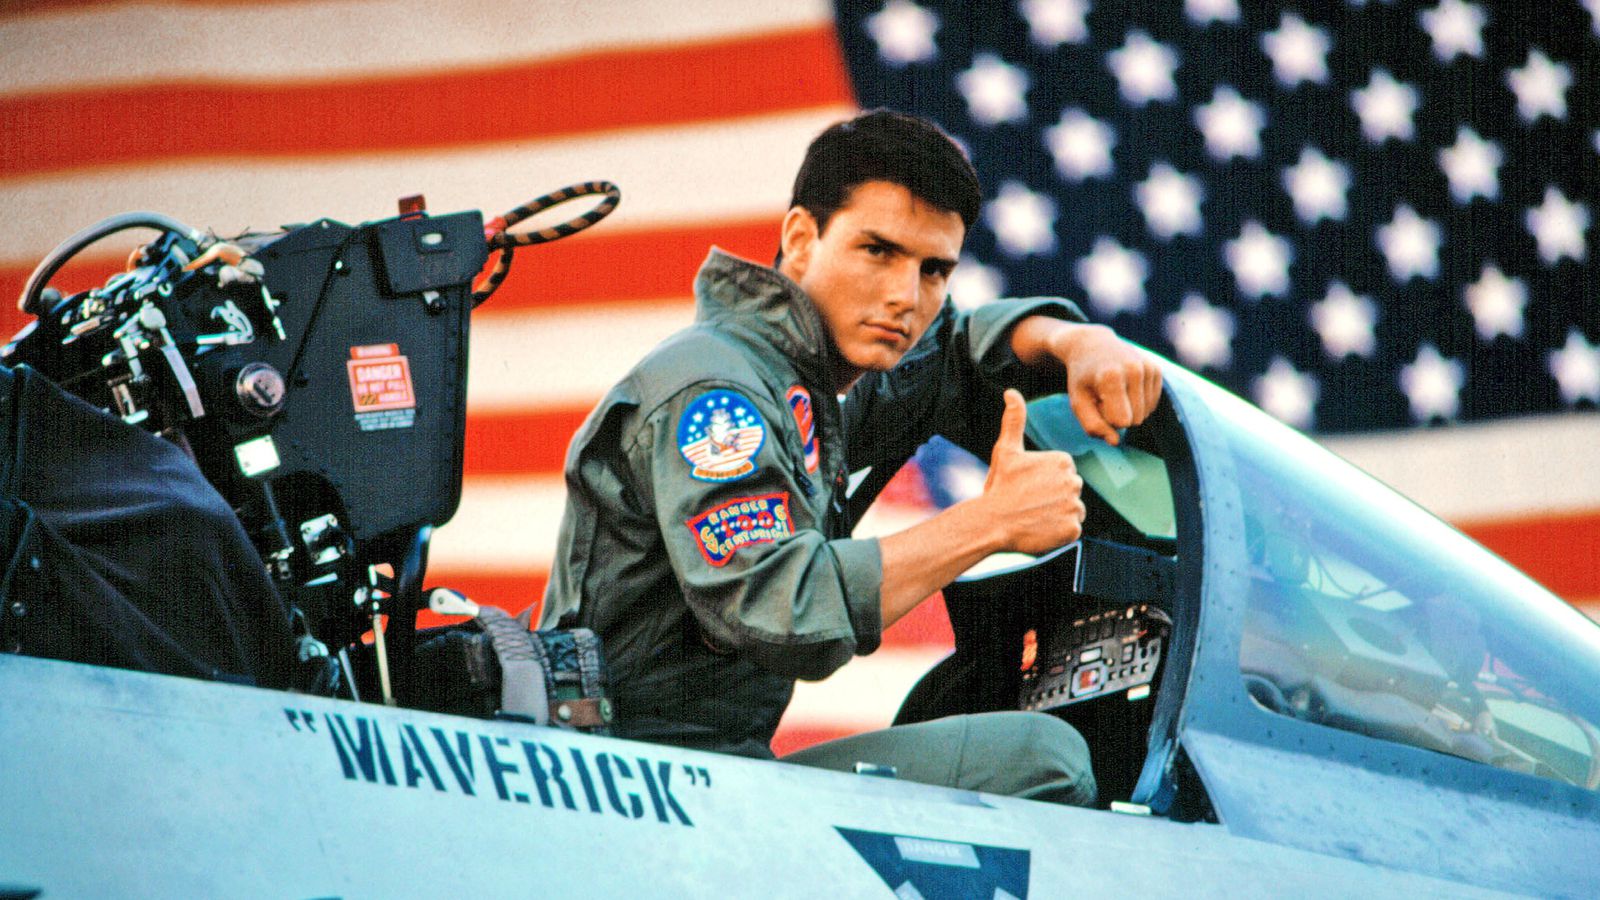 Tom Cruise gives a thumbs-up from the cockpit of a fighter jet, set against the backdrop of an American flag.